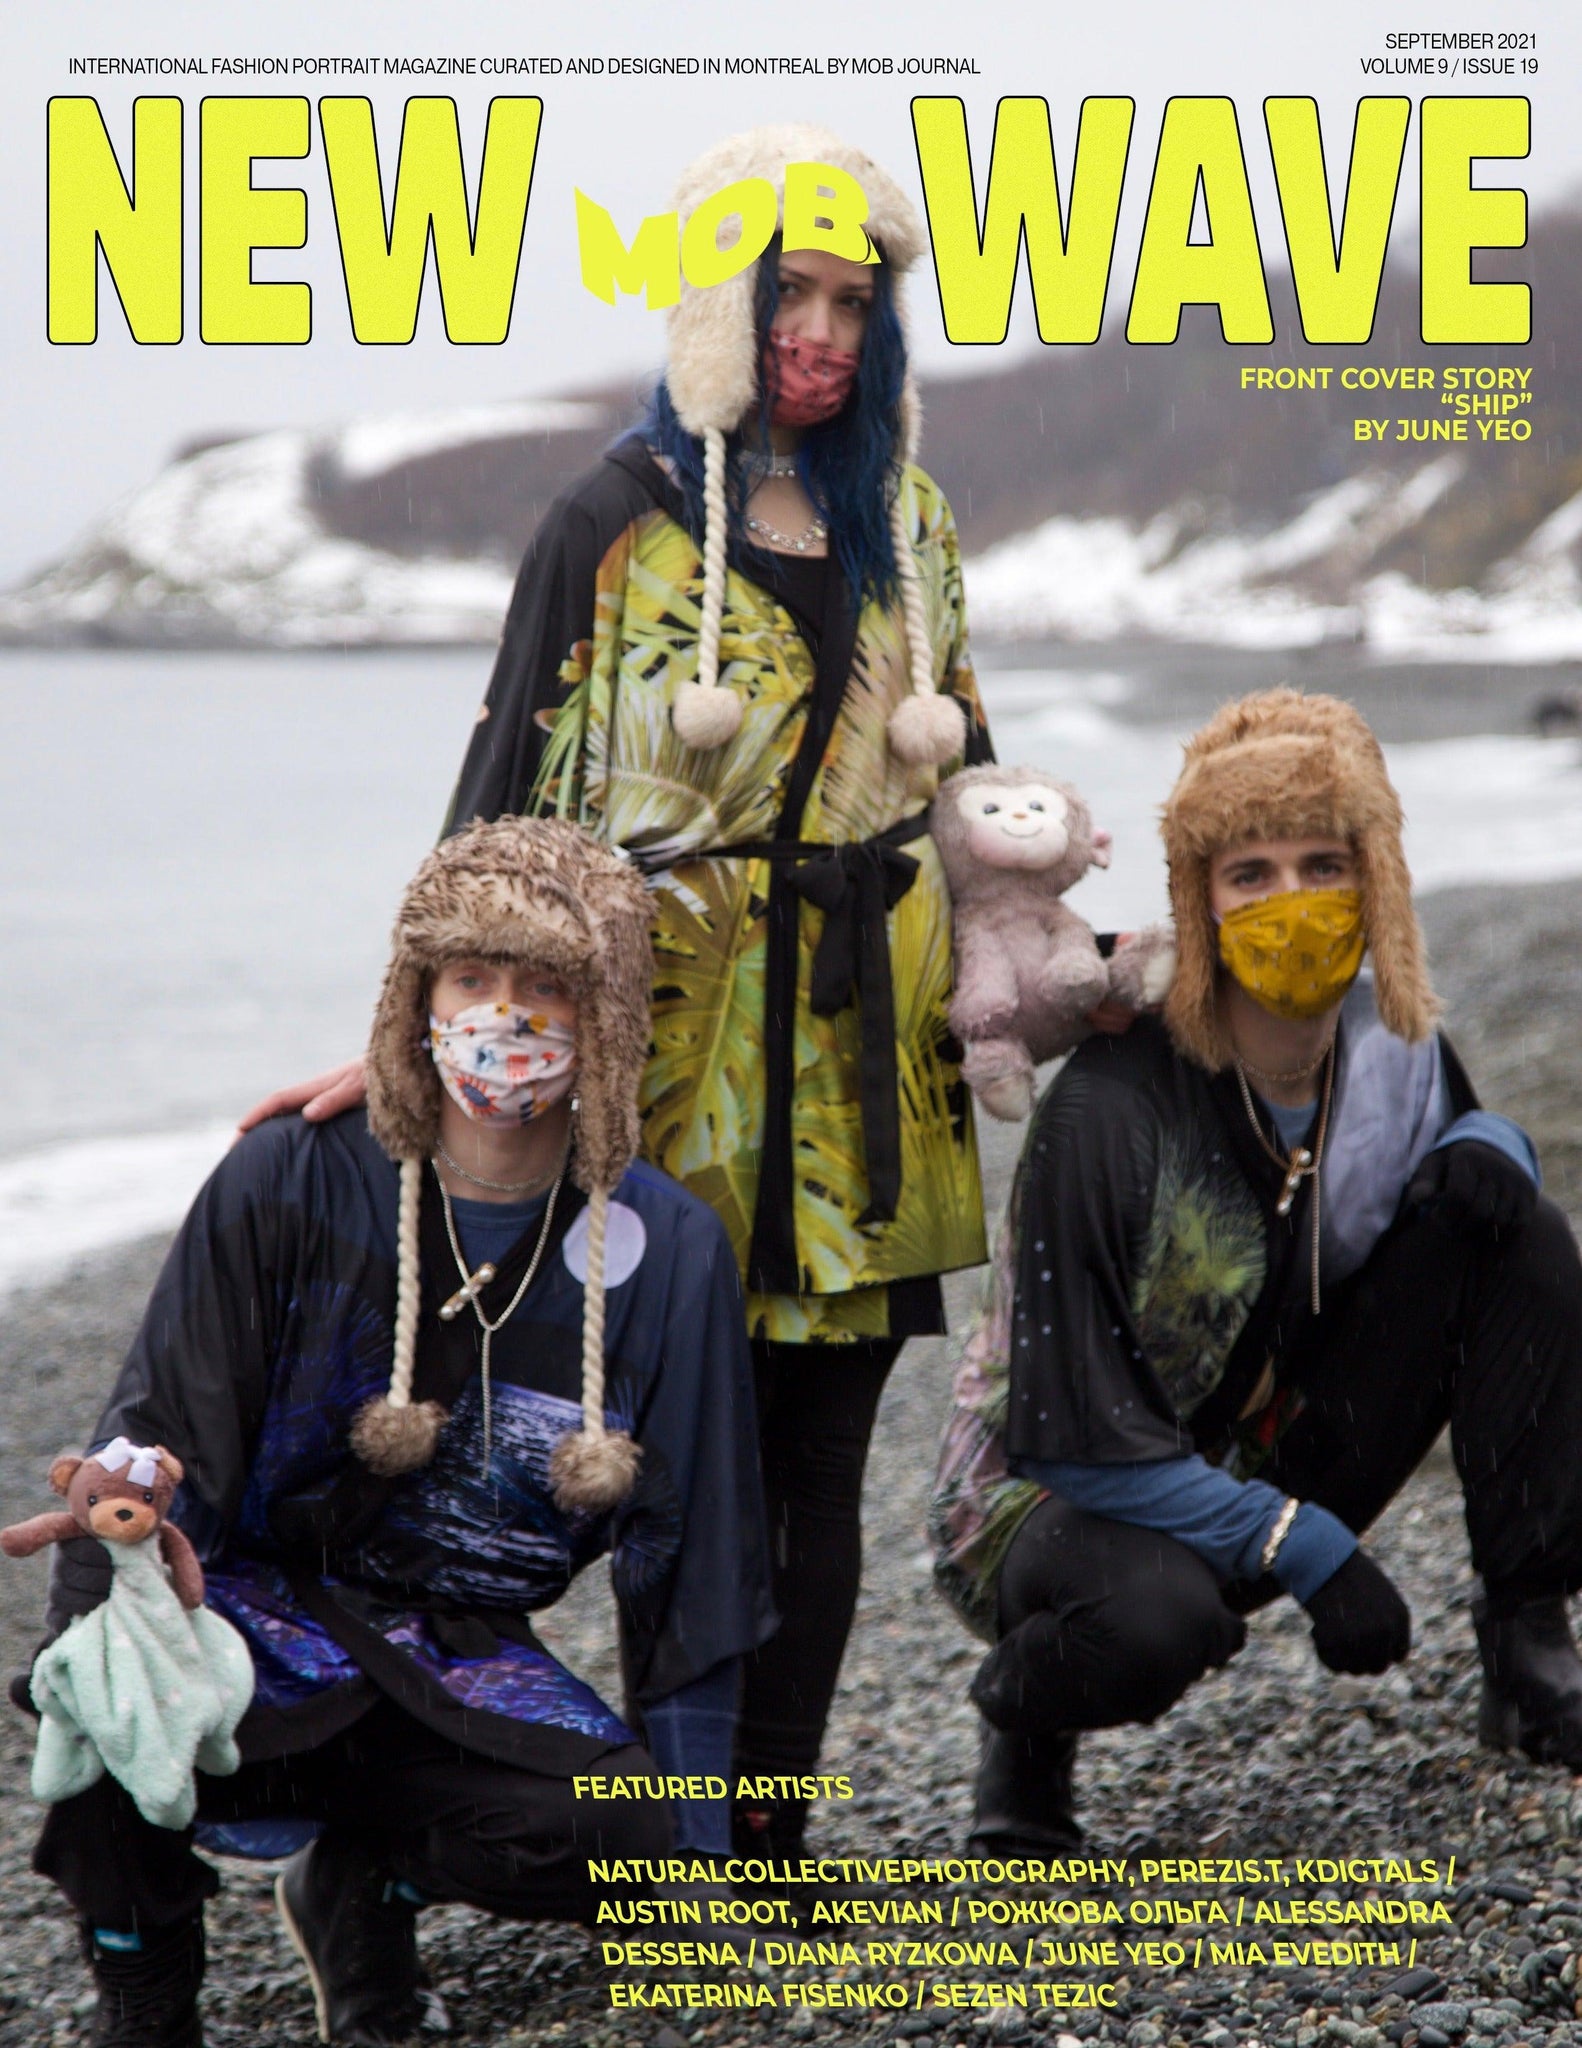 NEW WAVE | VOLUME NINE | ISSUE #19 - Mob Journal